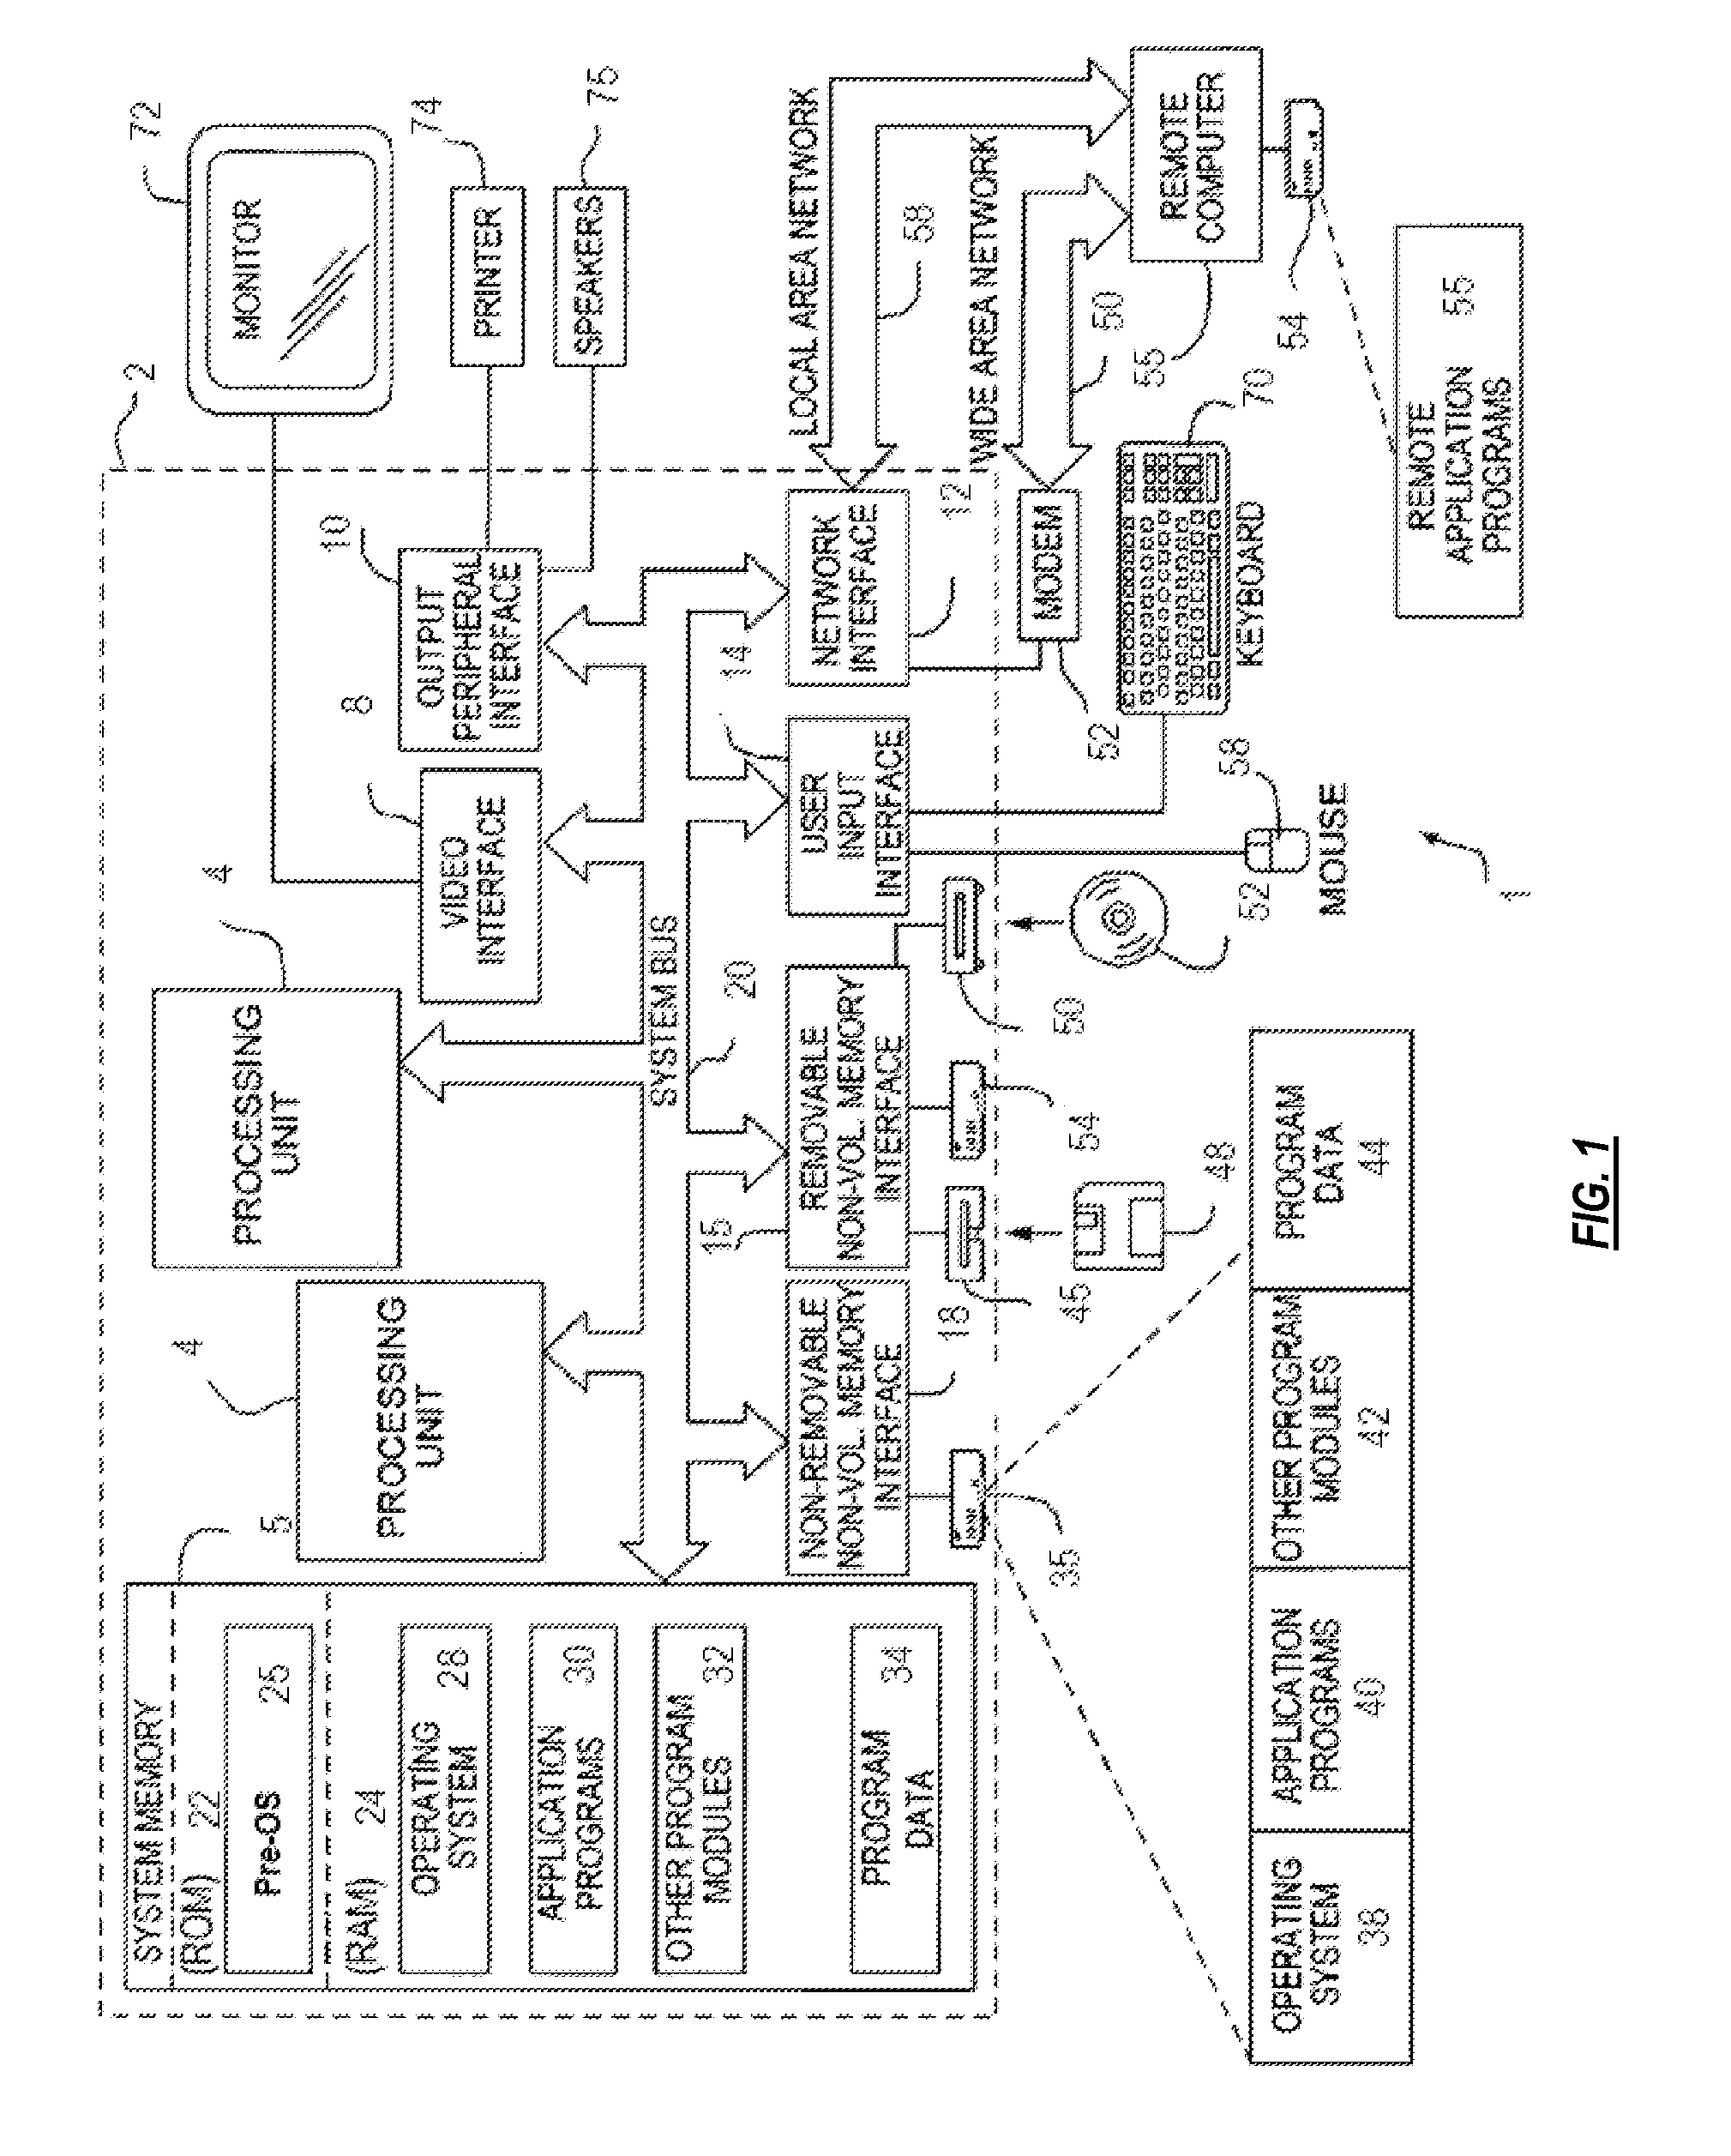 System and method for linking various protocols for controlling devices with their owners